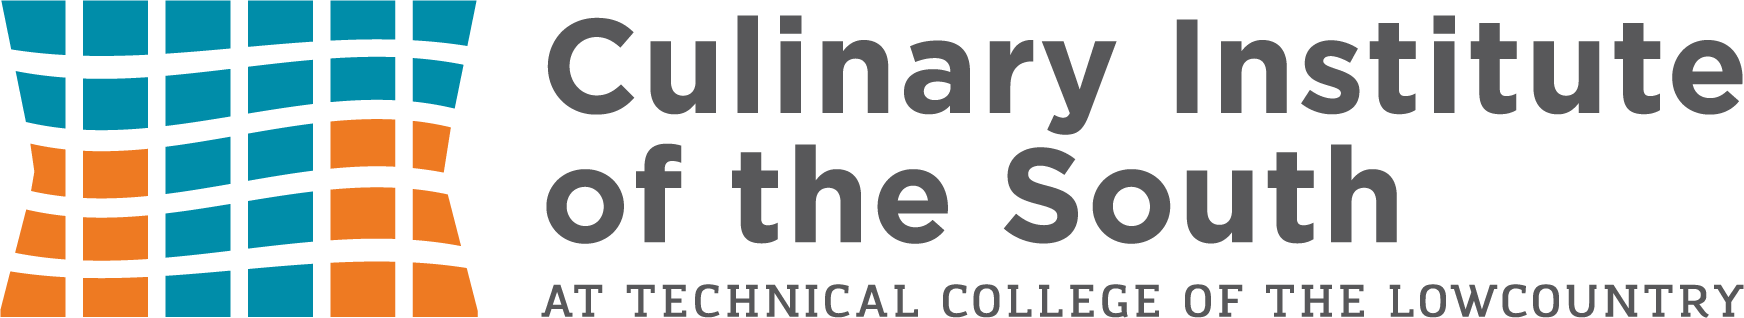 Culinary Institute of the South horizontal logo